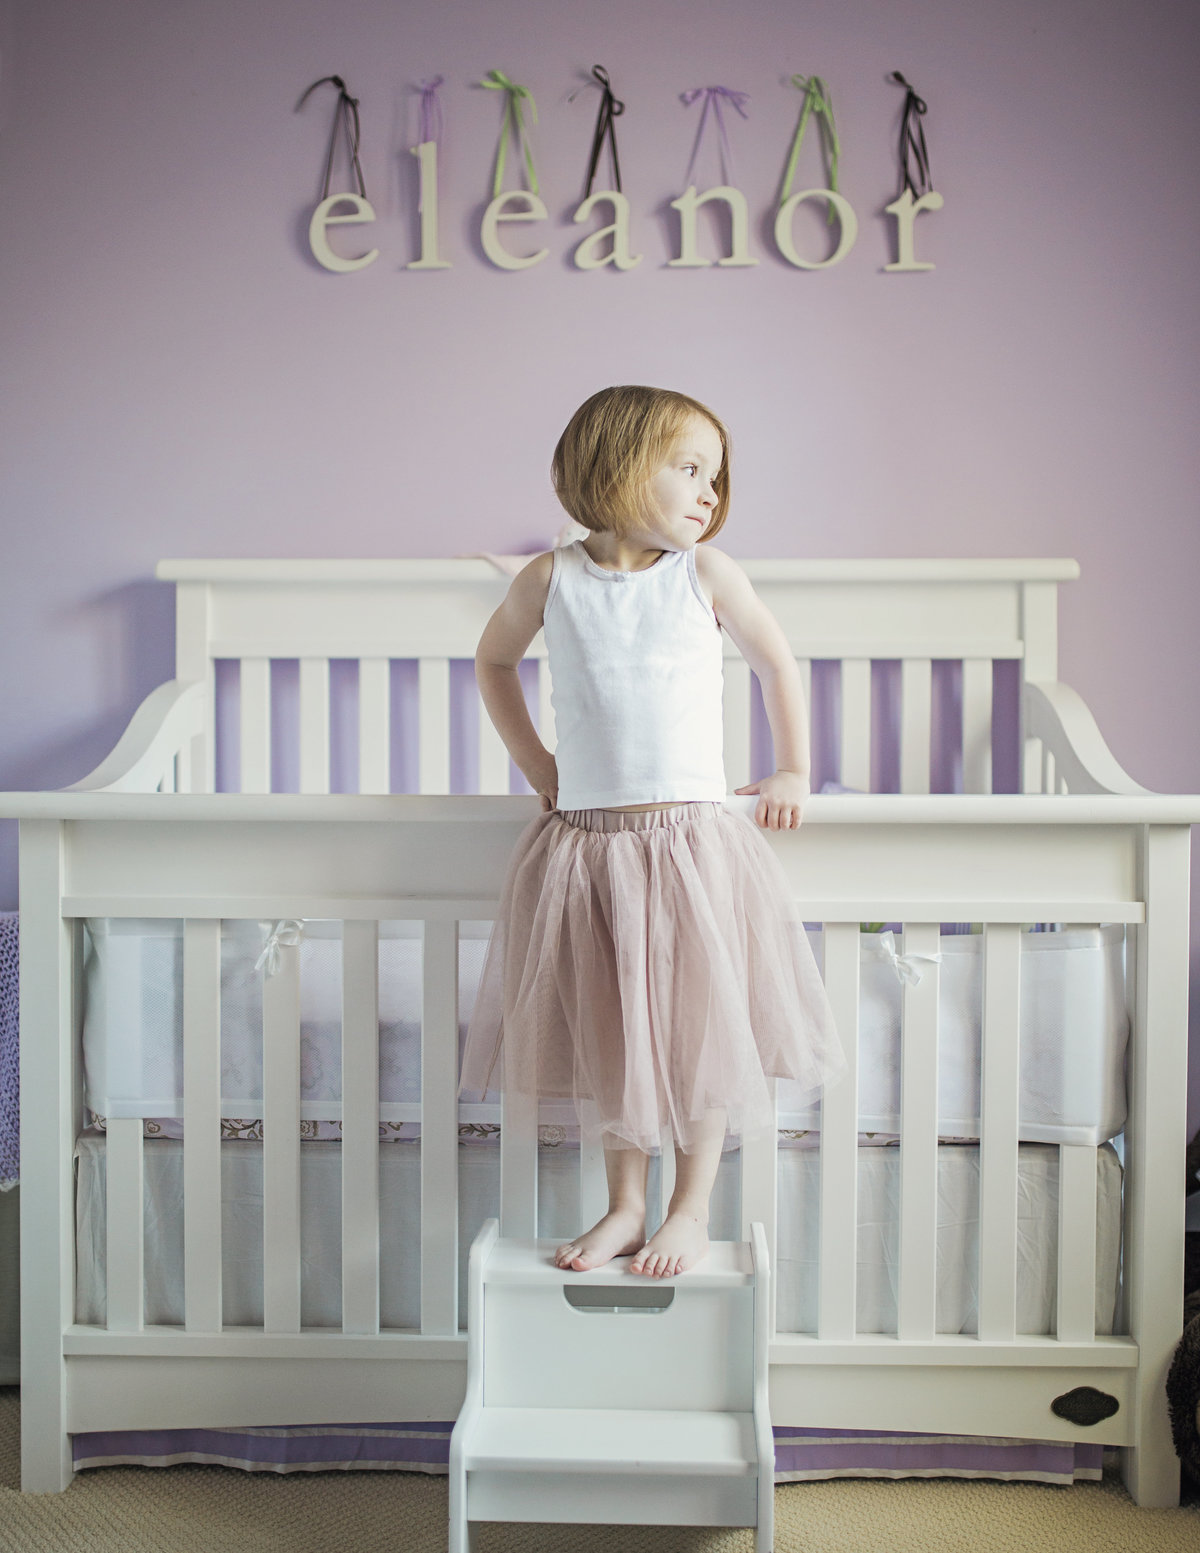 charlotte family photographer creates a beautiful lifestyle portrait of big sister standing by the new baby's crib